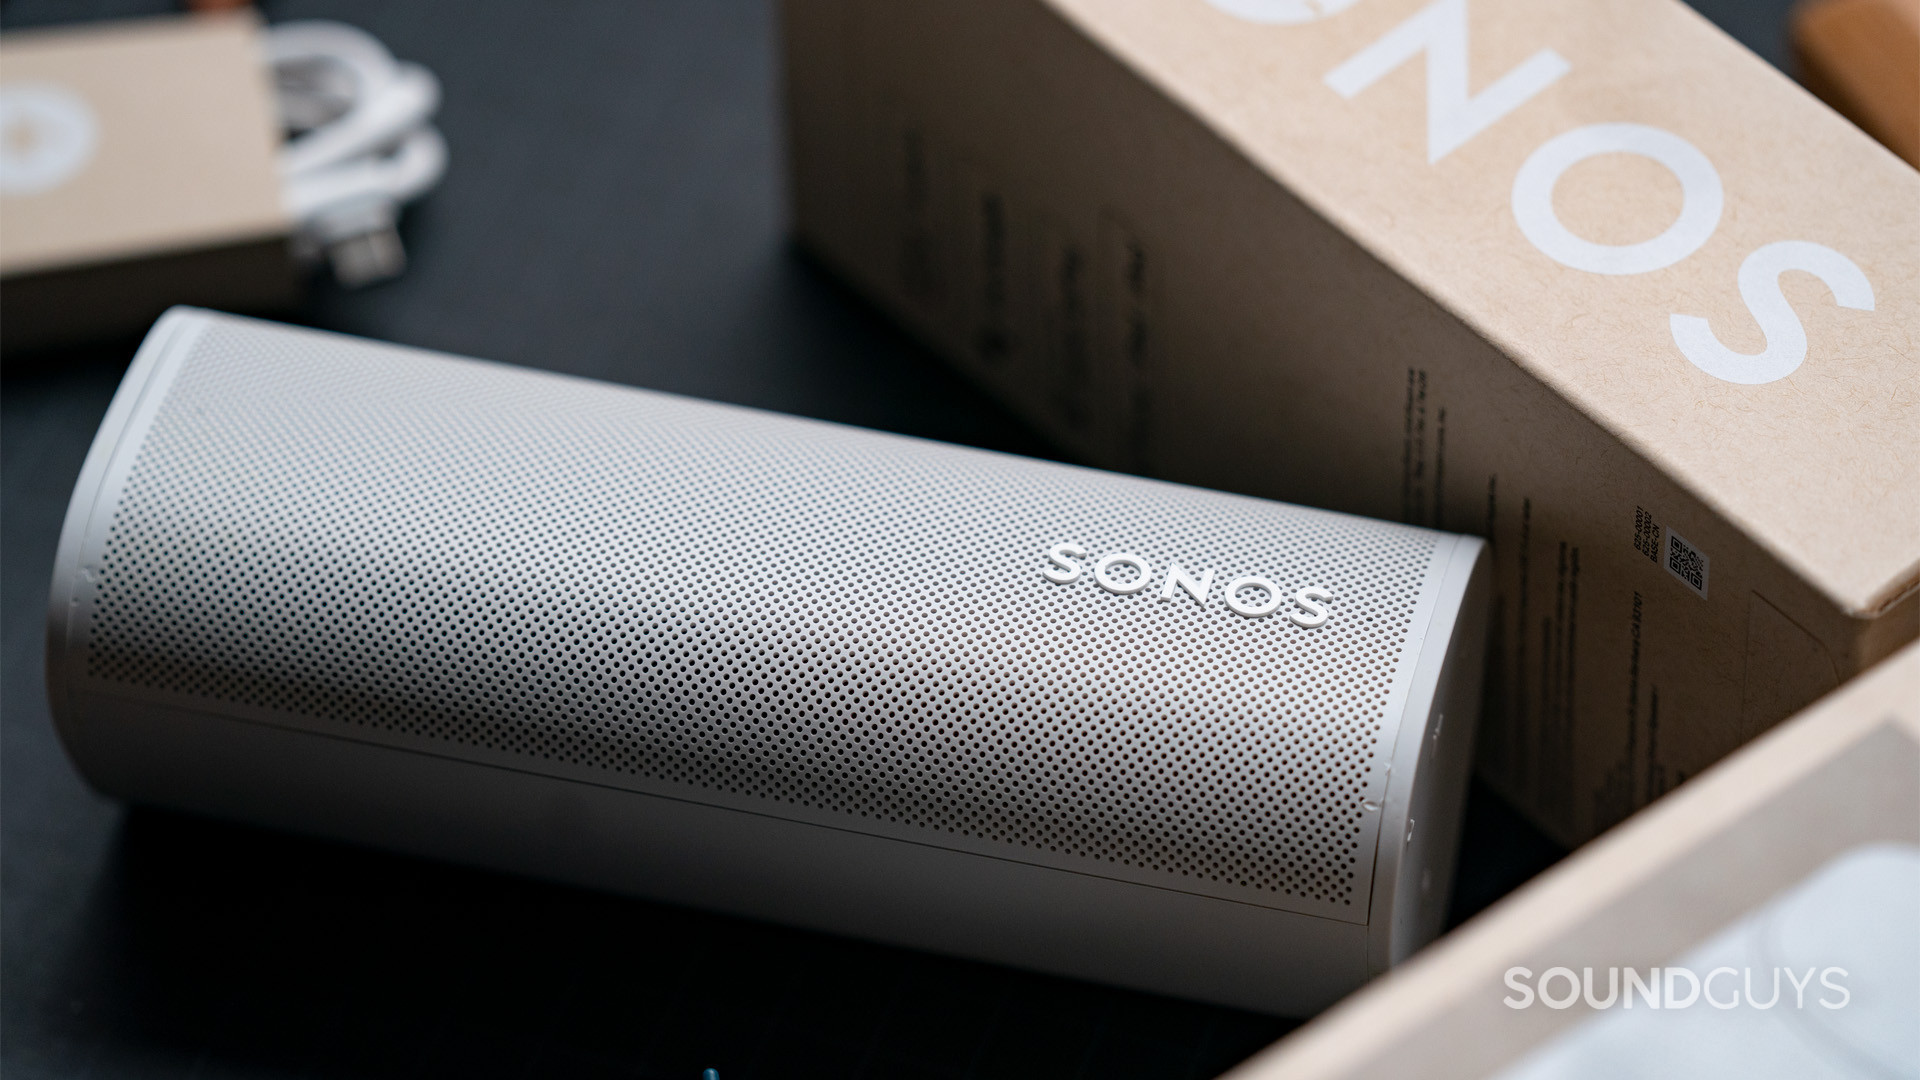 A Sonos Roam speaker sitting face-up next to the box it came in.